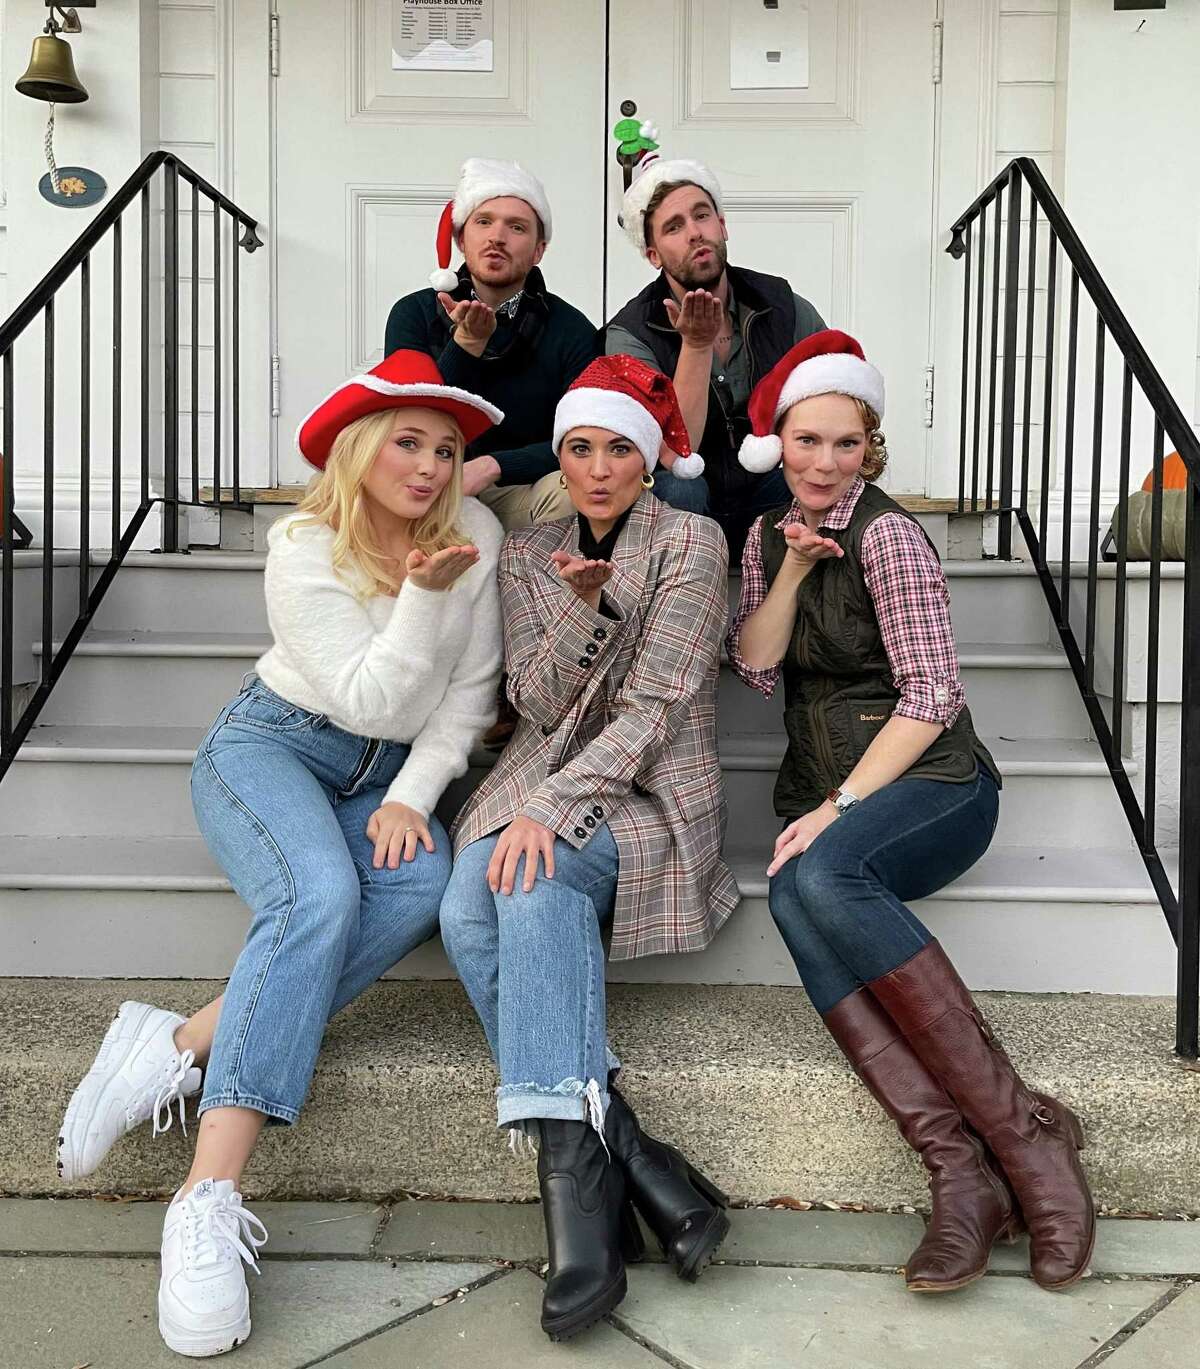 Cast members of Ivoryton Playhouse’s “A Christmas Survival Guide” are (back row, from left) Brian Michael Henry and Cory Candelet; and (front row) Emma Flynn, Corey Scheys and Adrianne Hick.